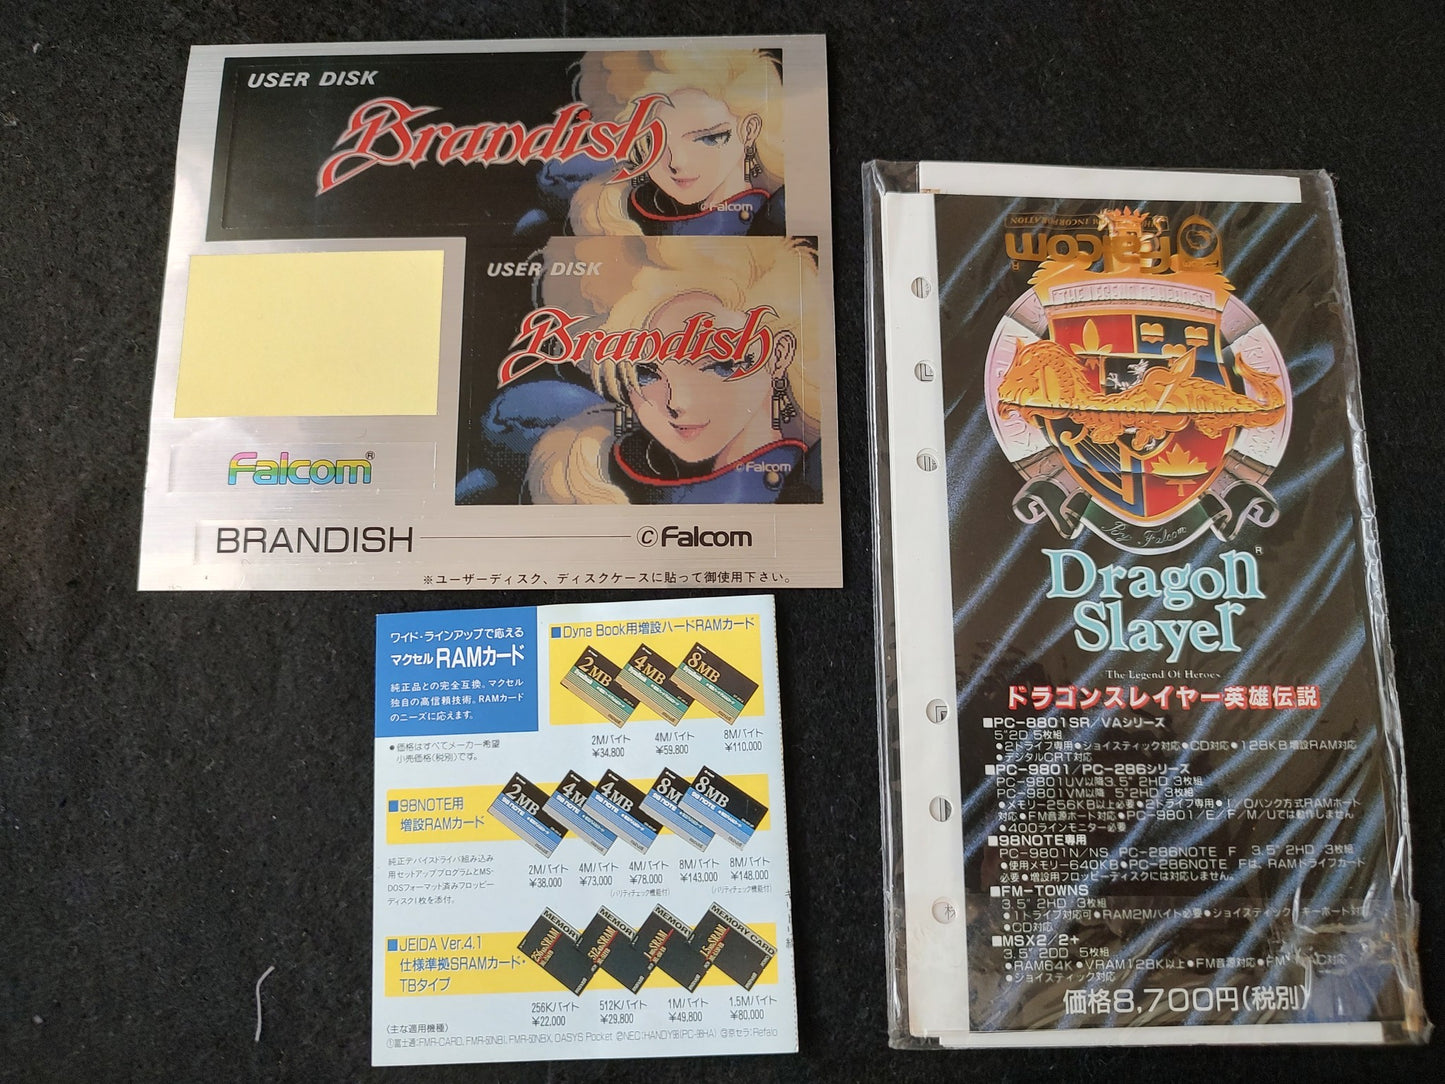 PC-9801 PC98 Brandish Game Floppy disks, w/Manual, Box set,Partly tested-f0626-